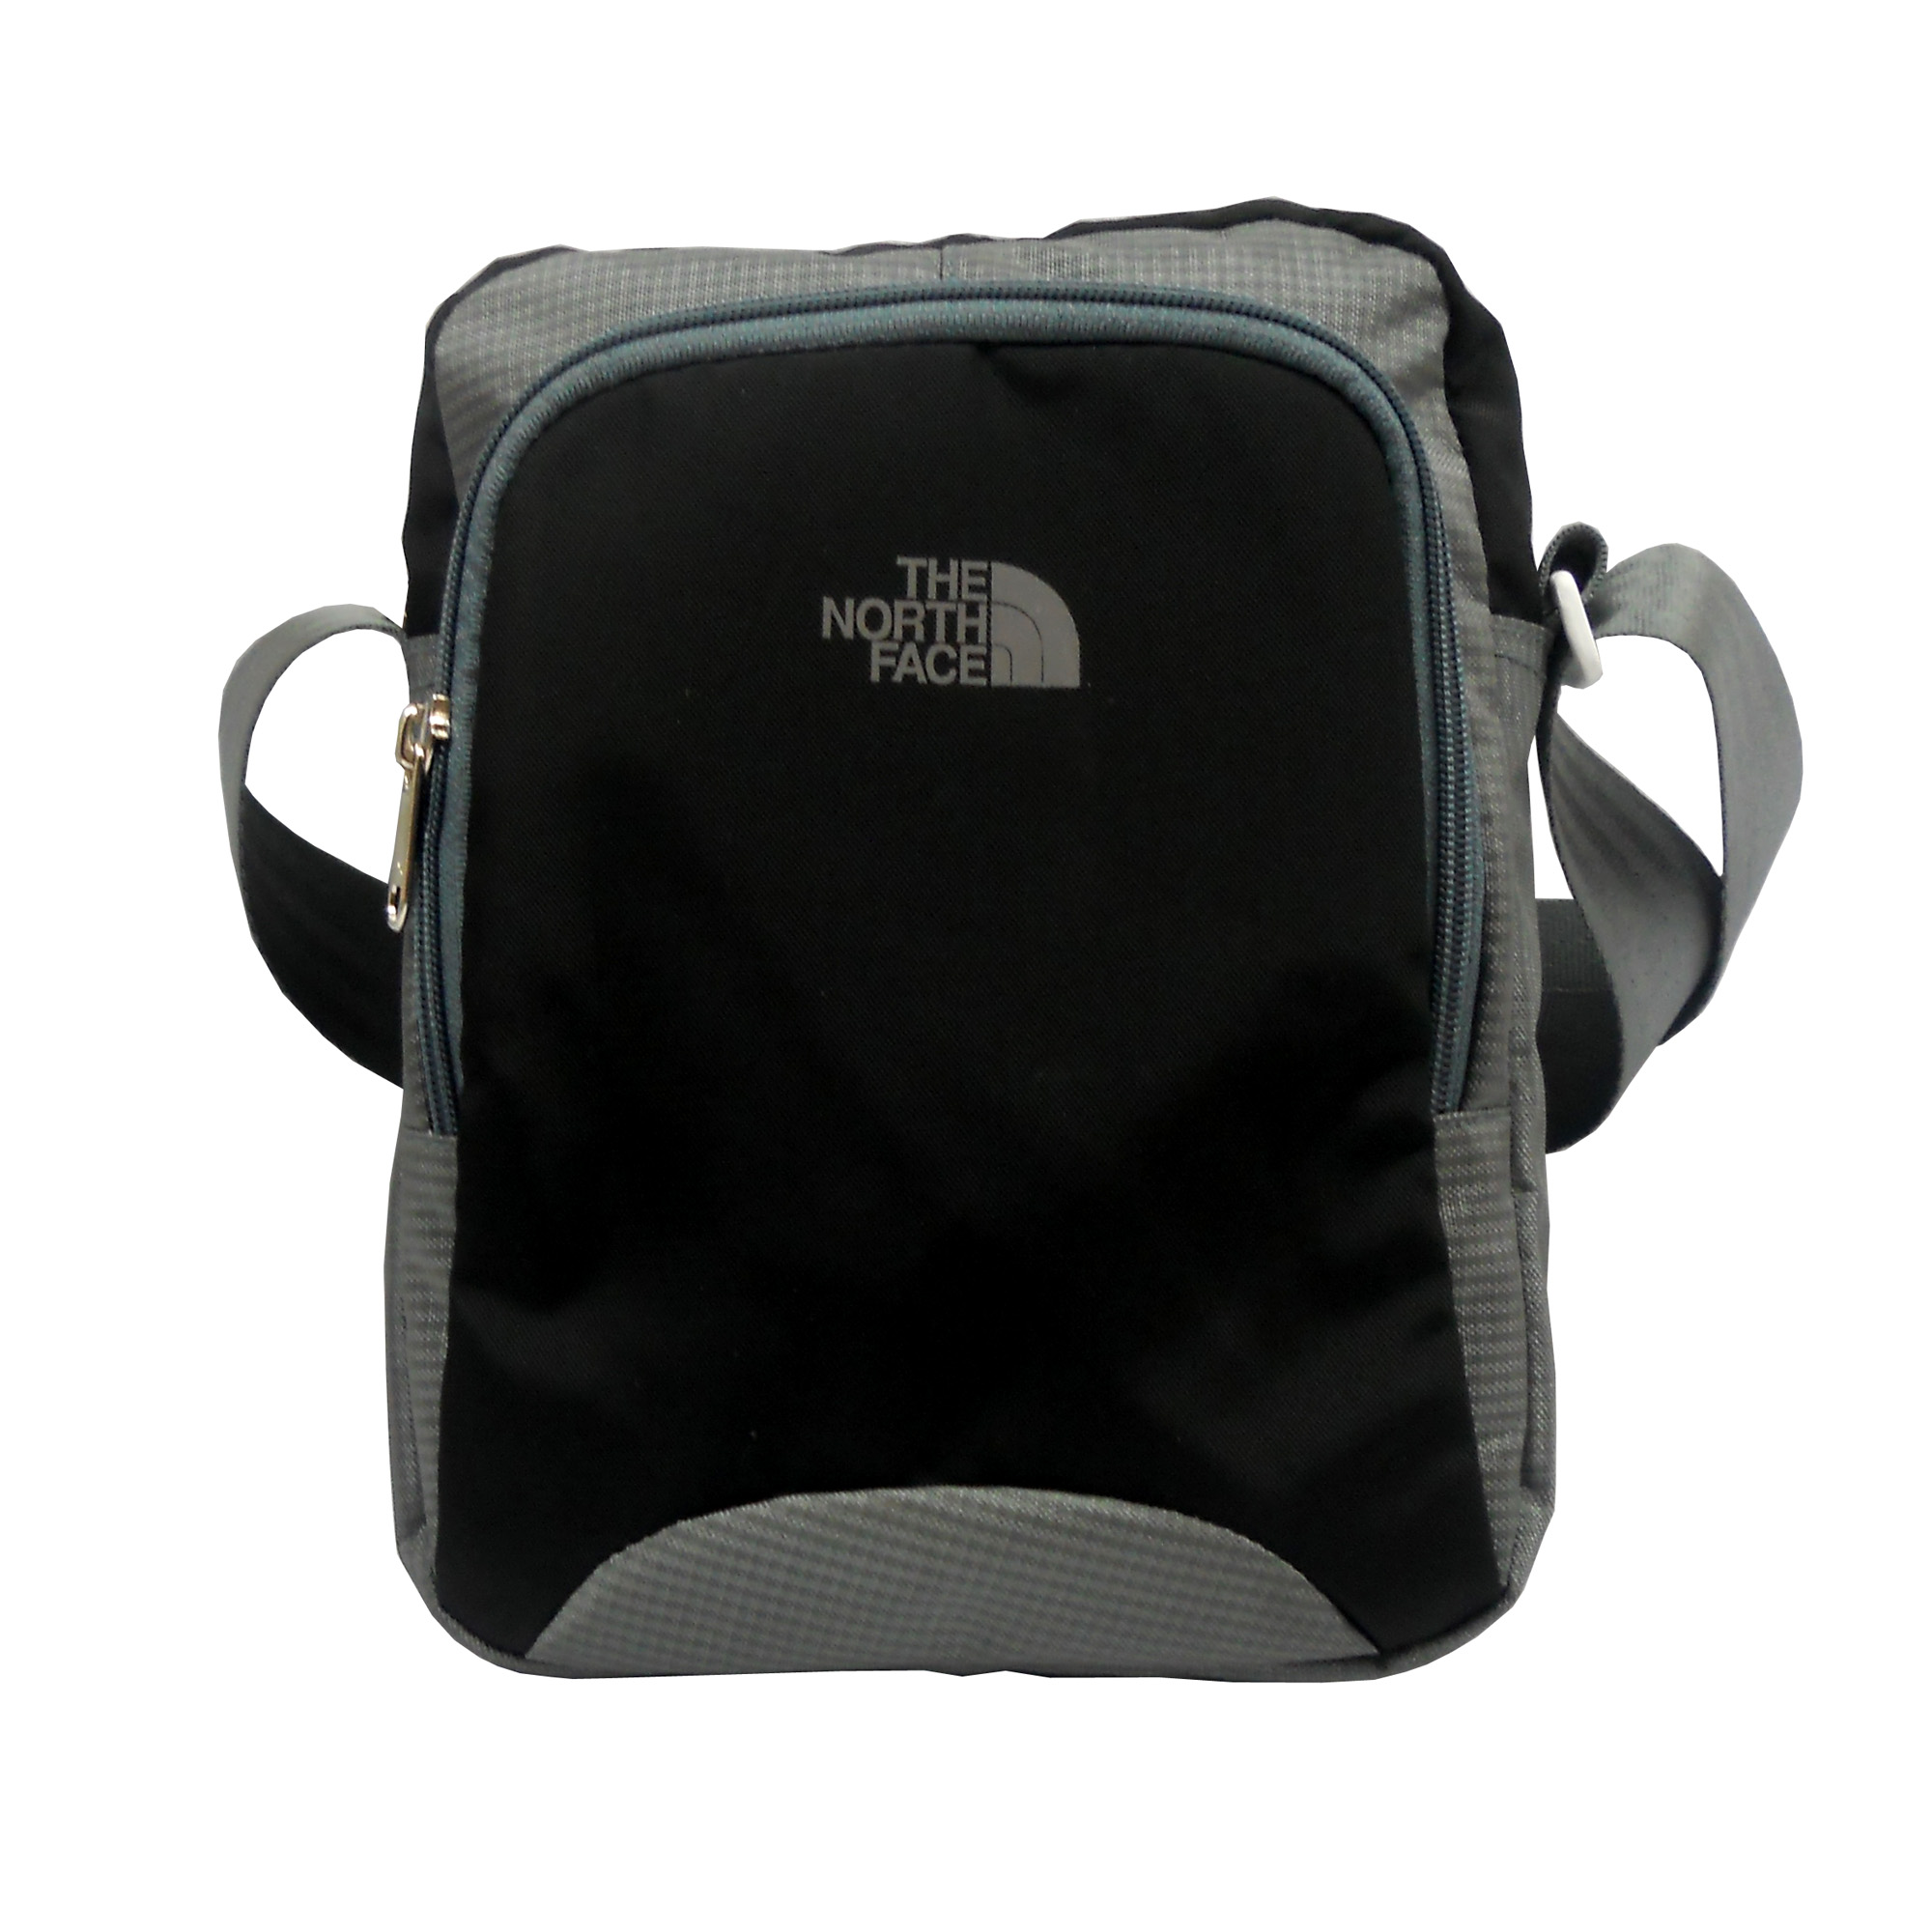 The North Face Stylish Light weight Black & Grey Color Tab Sling Bag ...